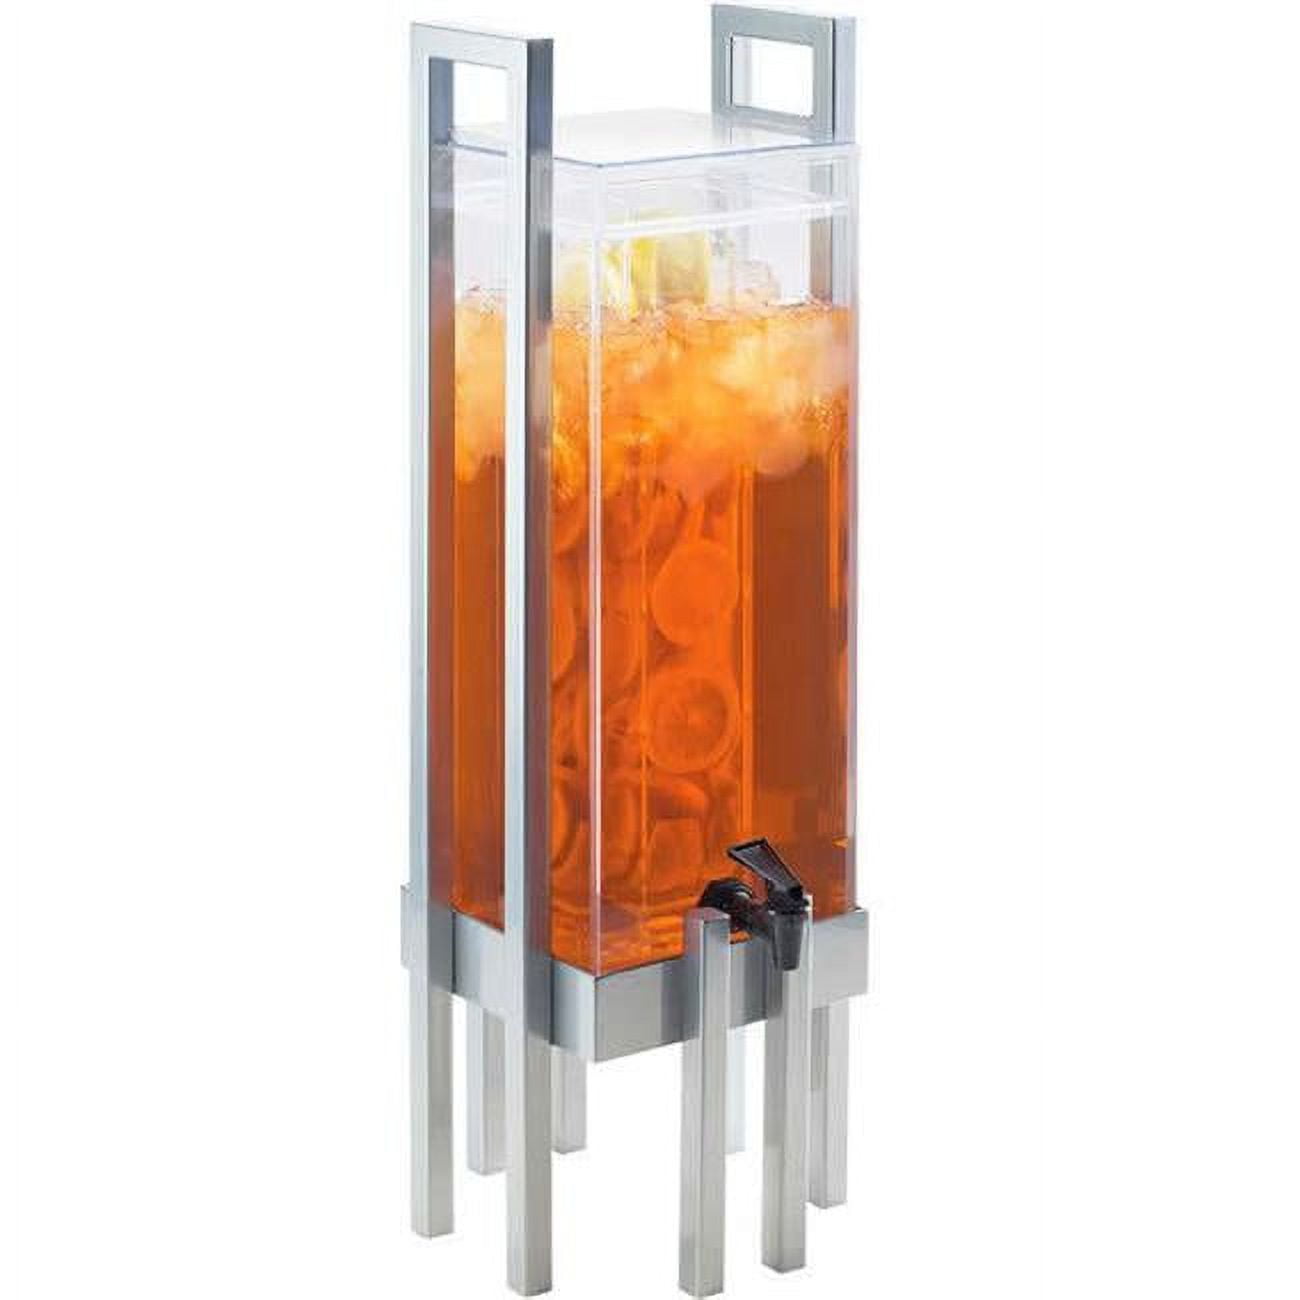 3302-3inf-74 3 Gal Silver Infusion Chamber One By One Acrylic Beverage Dispenser - Clear & Silver